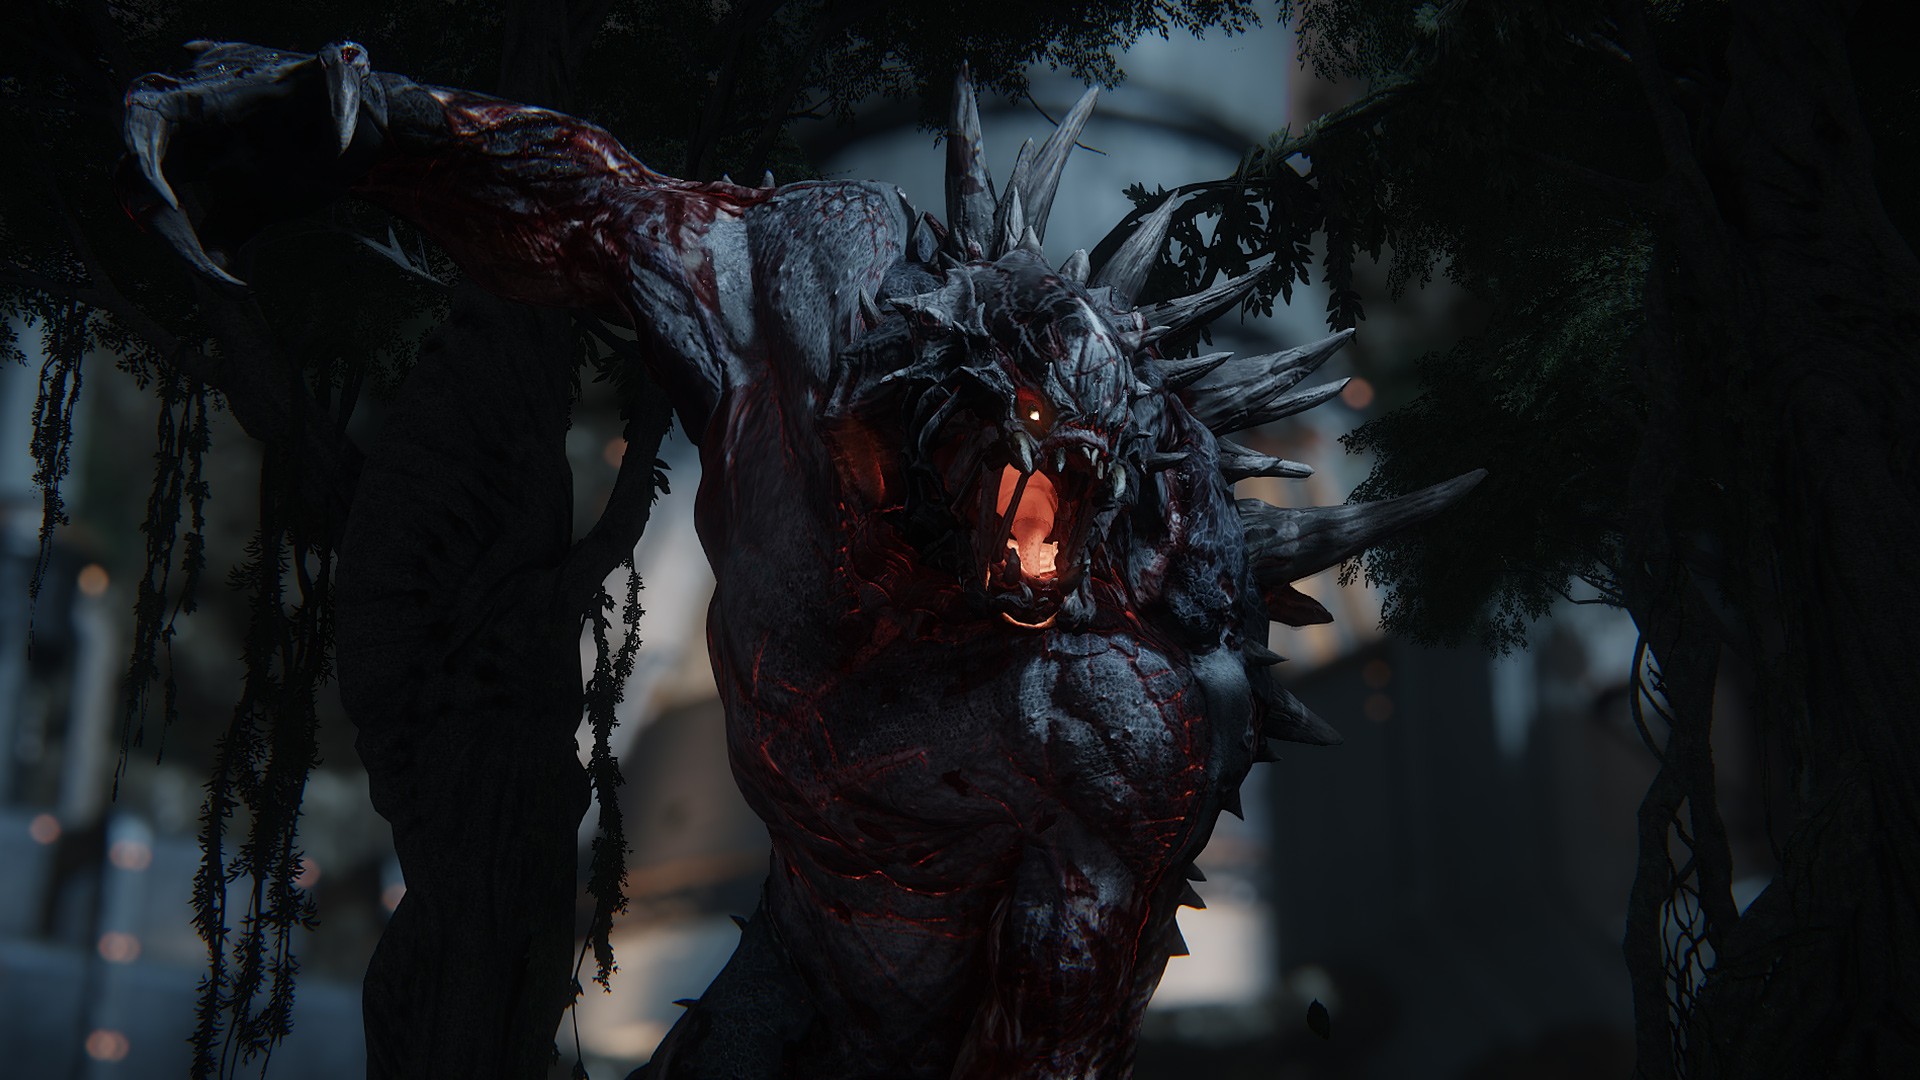 Evolve Will Have a Season Pass, Behemoth Monster Not a Part of It